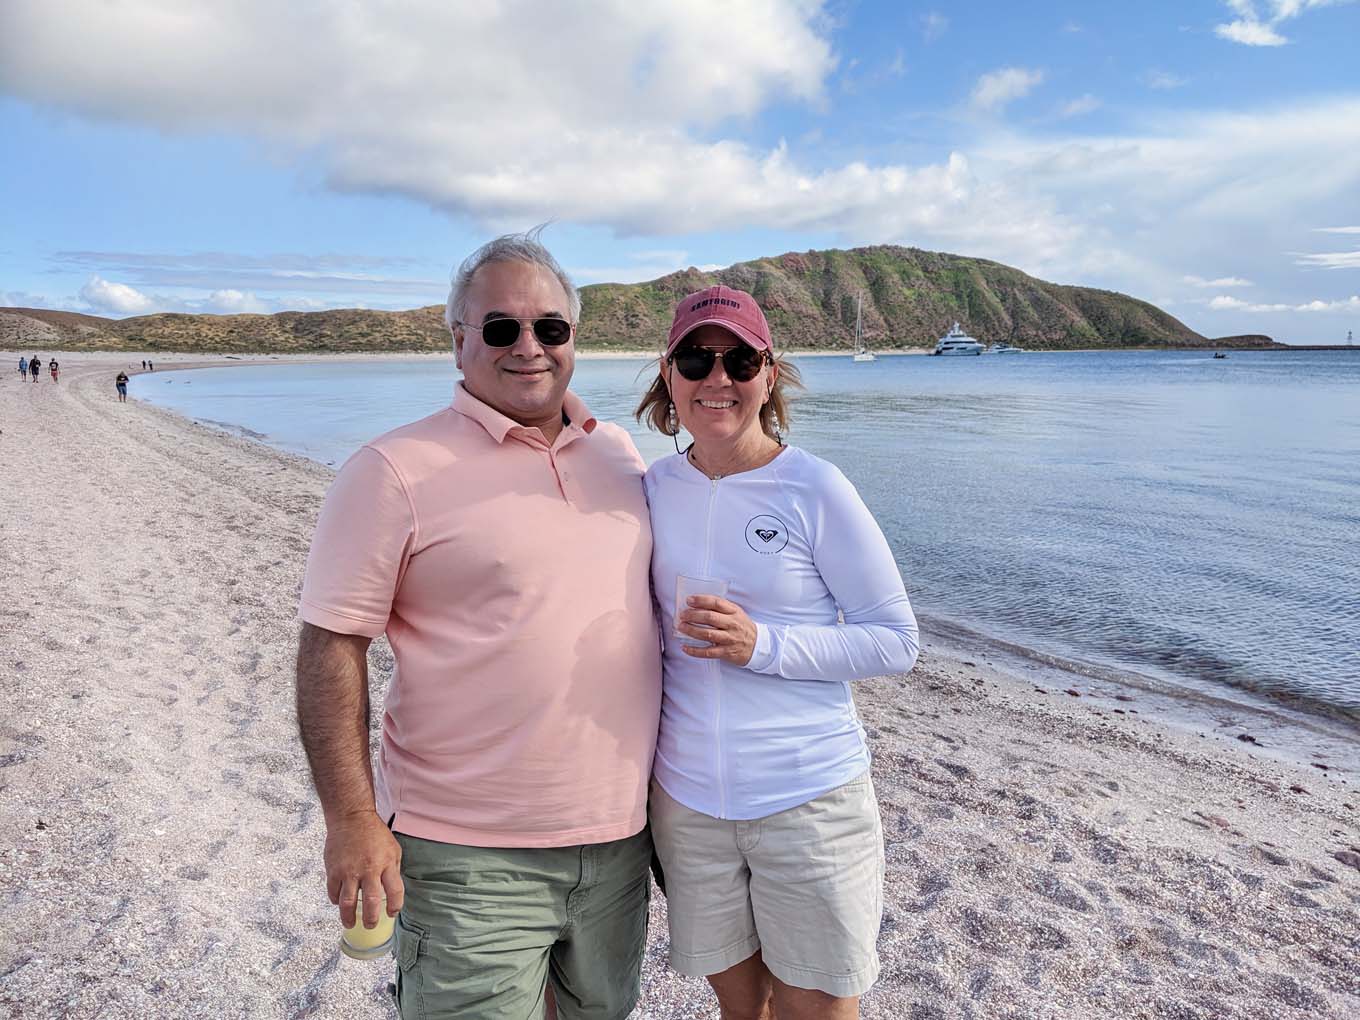 Chef Dennis and Lisa on the beach off the sea of cortez.